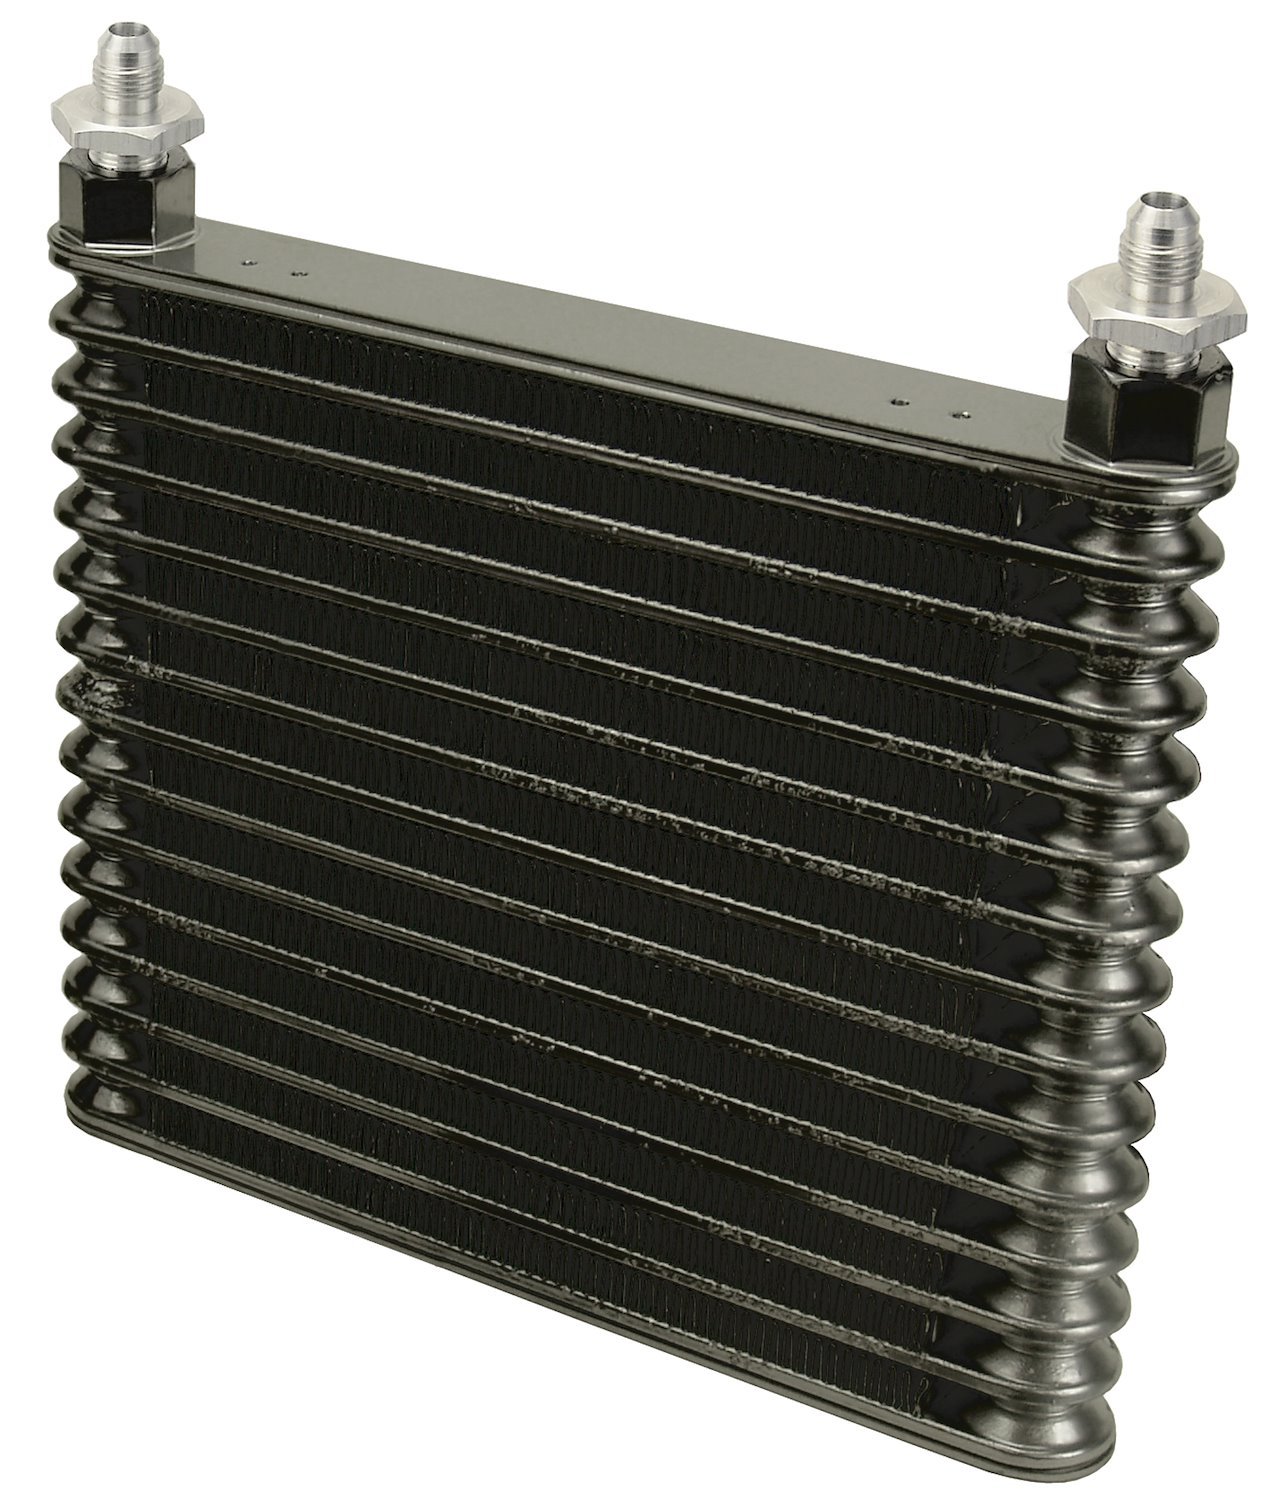 Transmission / Oil Cooler Core Replacement For P/N 259-13950 & 259-13750